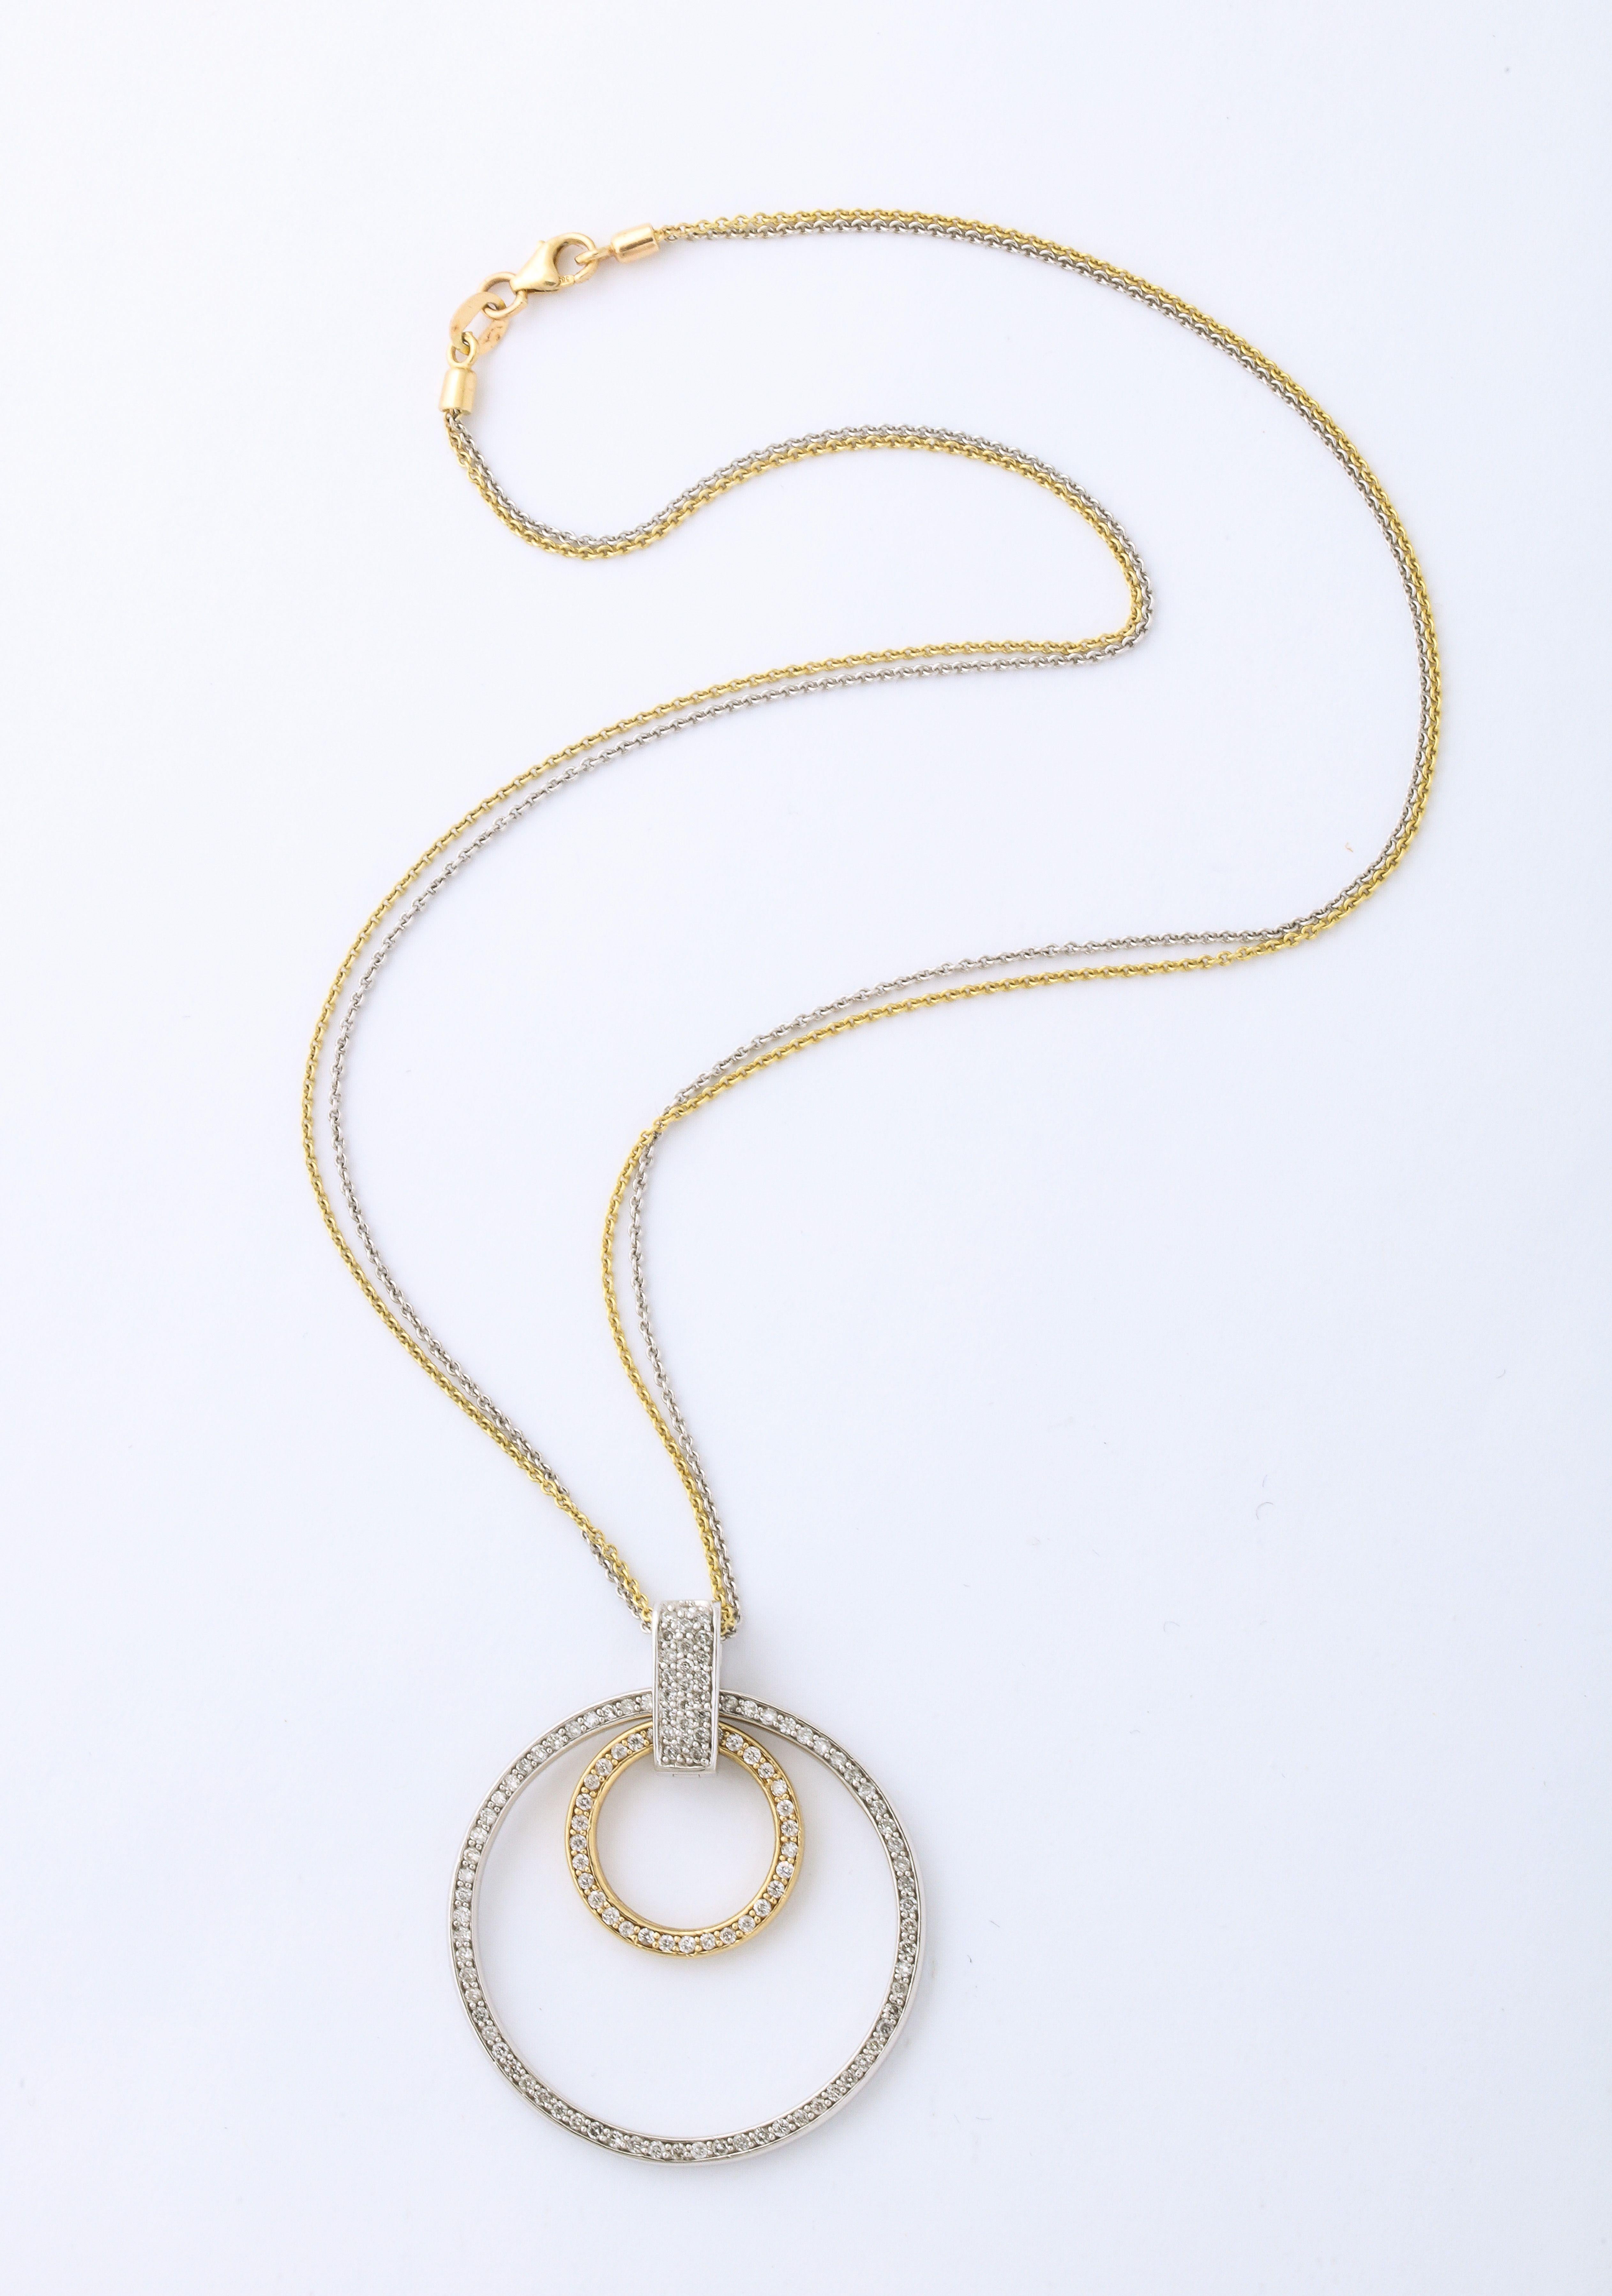 A great White and Yellow Gold Diamond Necklace with two rings linked by a diamond encrusted gold clasp suspended by a yellow gold chain